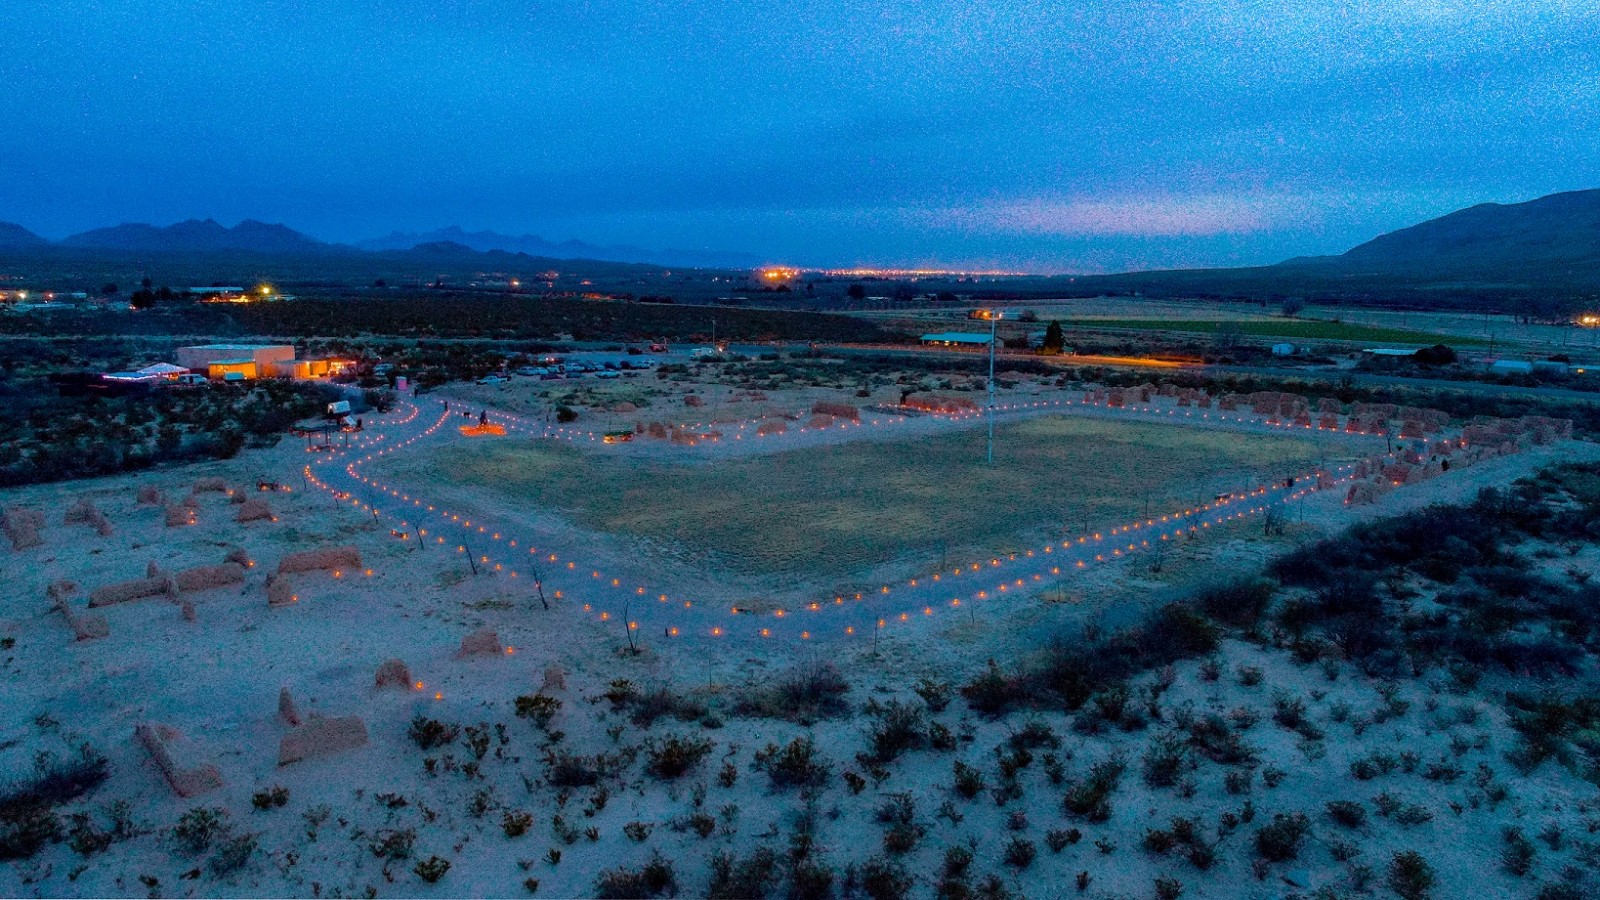 An aerial view from 2019's Las Noches de Las Luminarias. Photo by Robert Paquette.